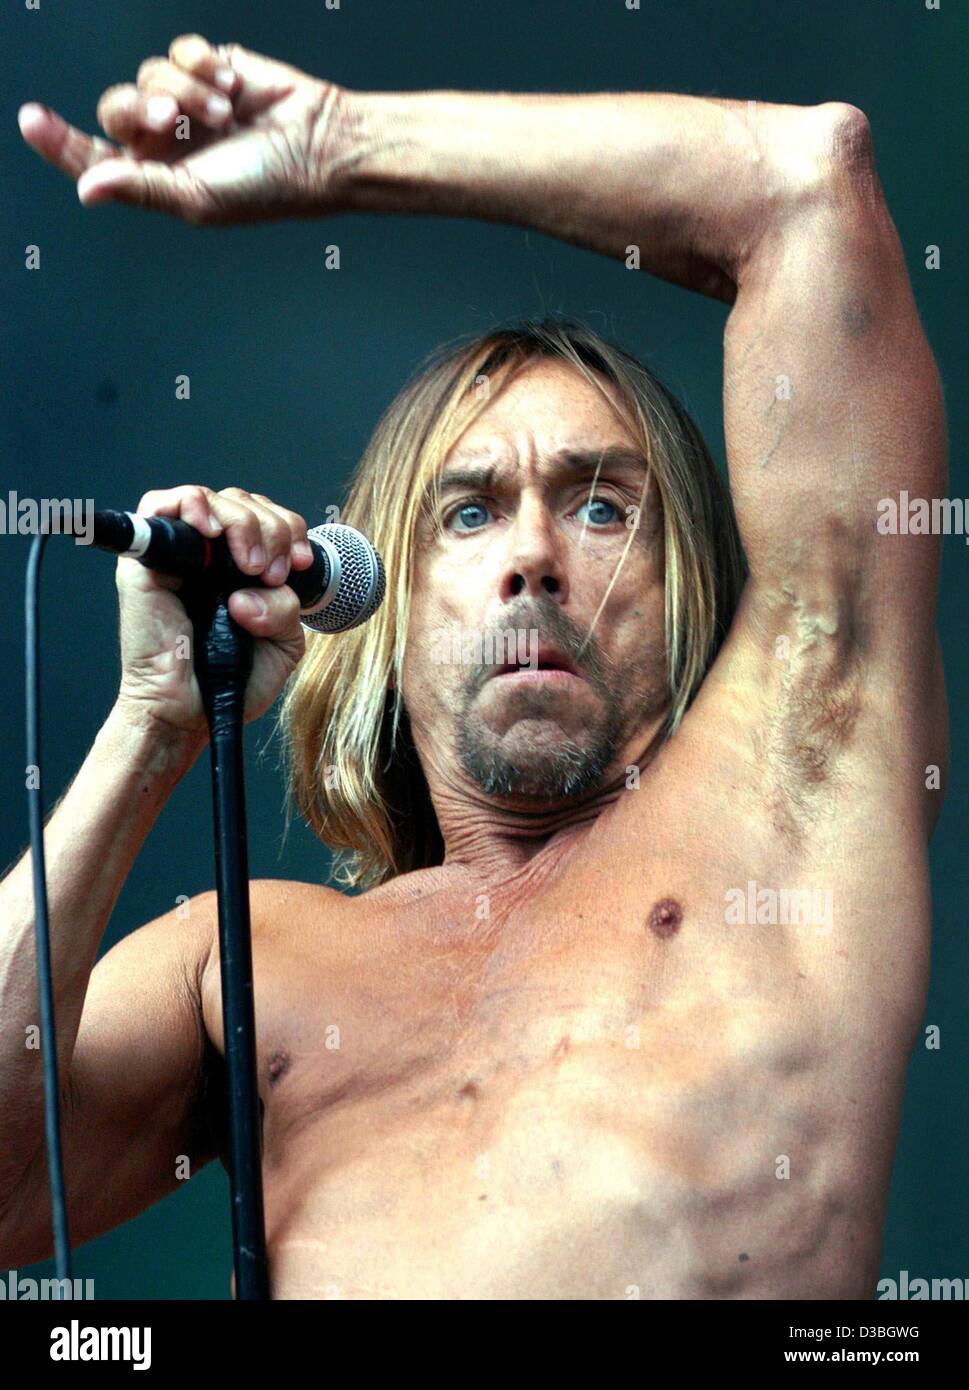 dpa) - The US punk legend Iggy Pop performs during his only concert in  Germany, in Hamburg, 15 June 2003. The excentric 56-year-old stayed on  stage for one hour and presented songs